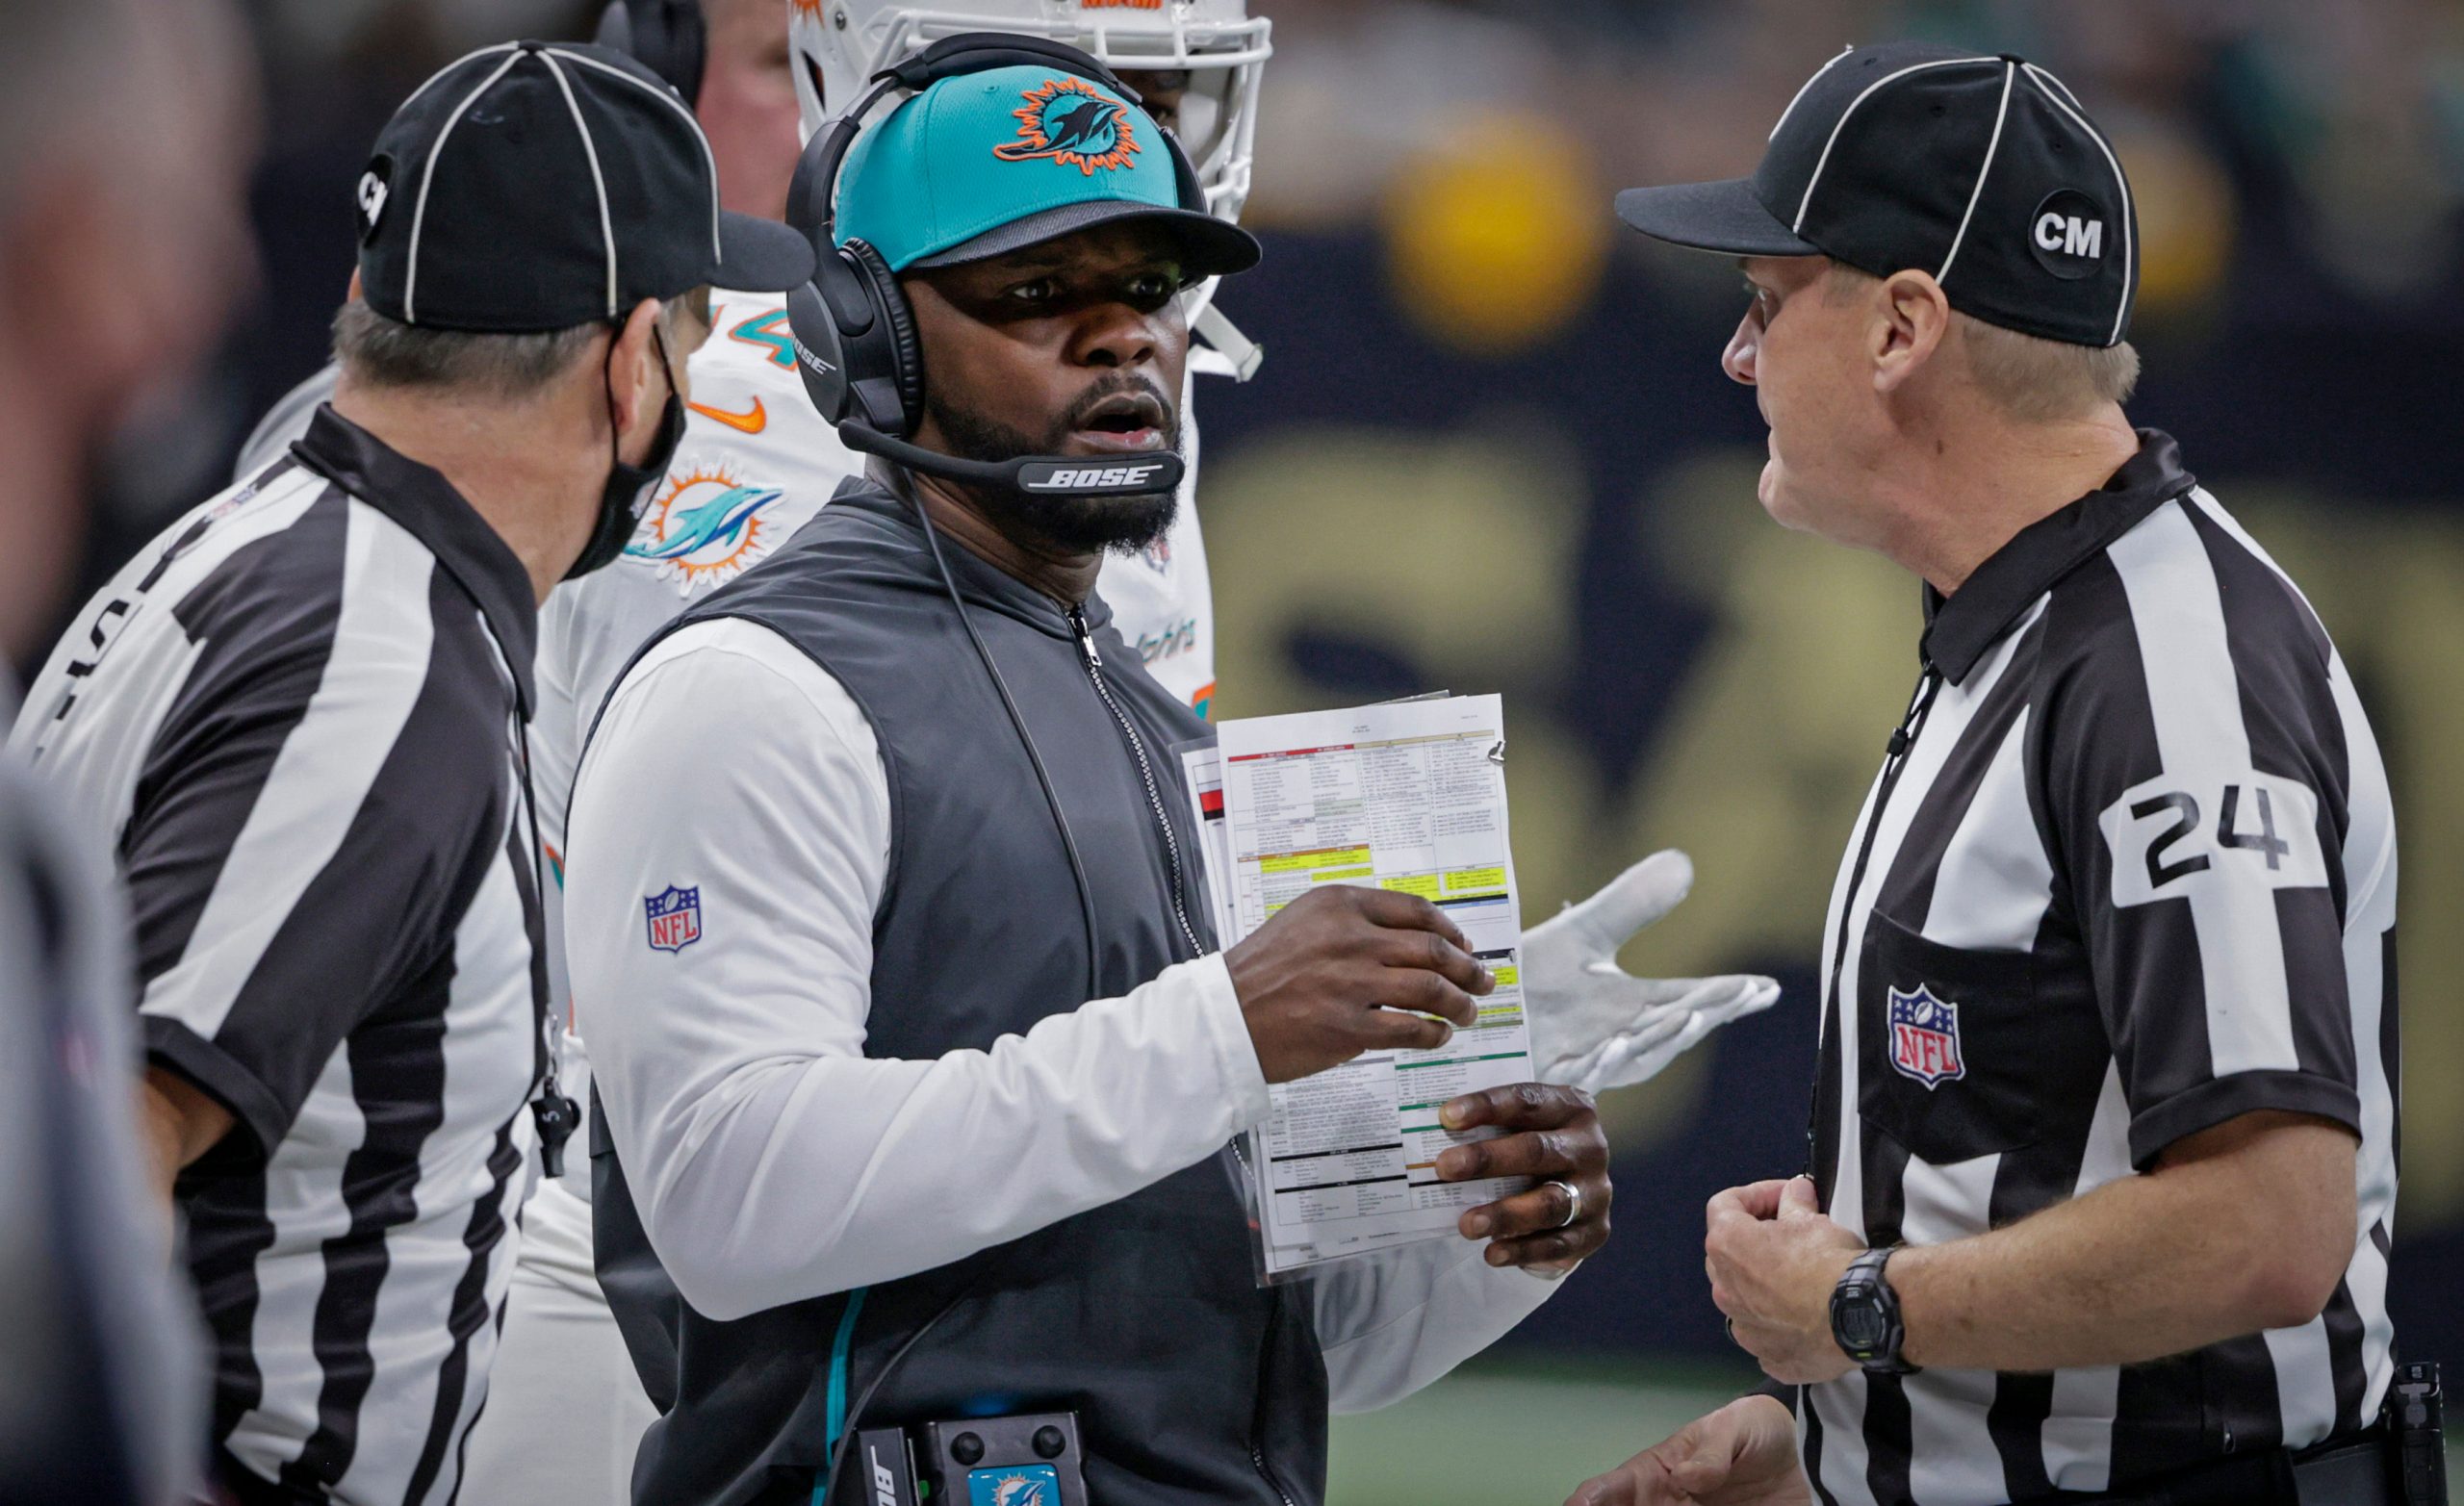 Brian Flores, fired Miami Dolphins coach, sues NFL over alleged racist hiring